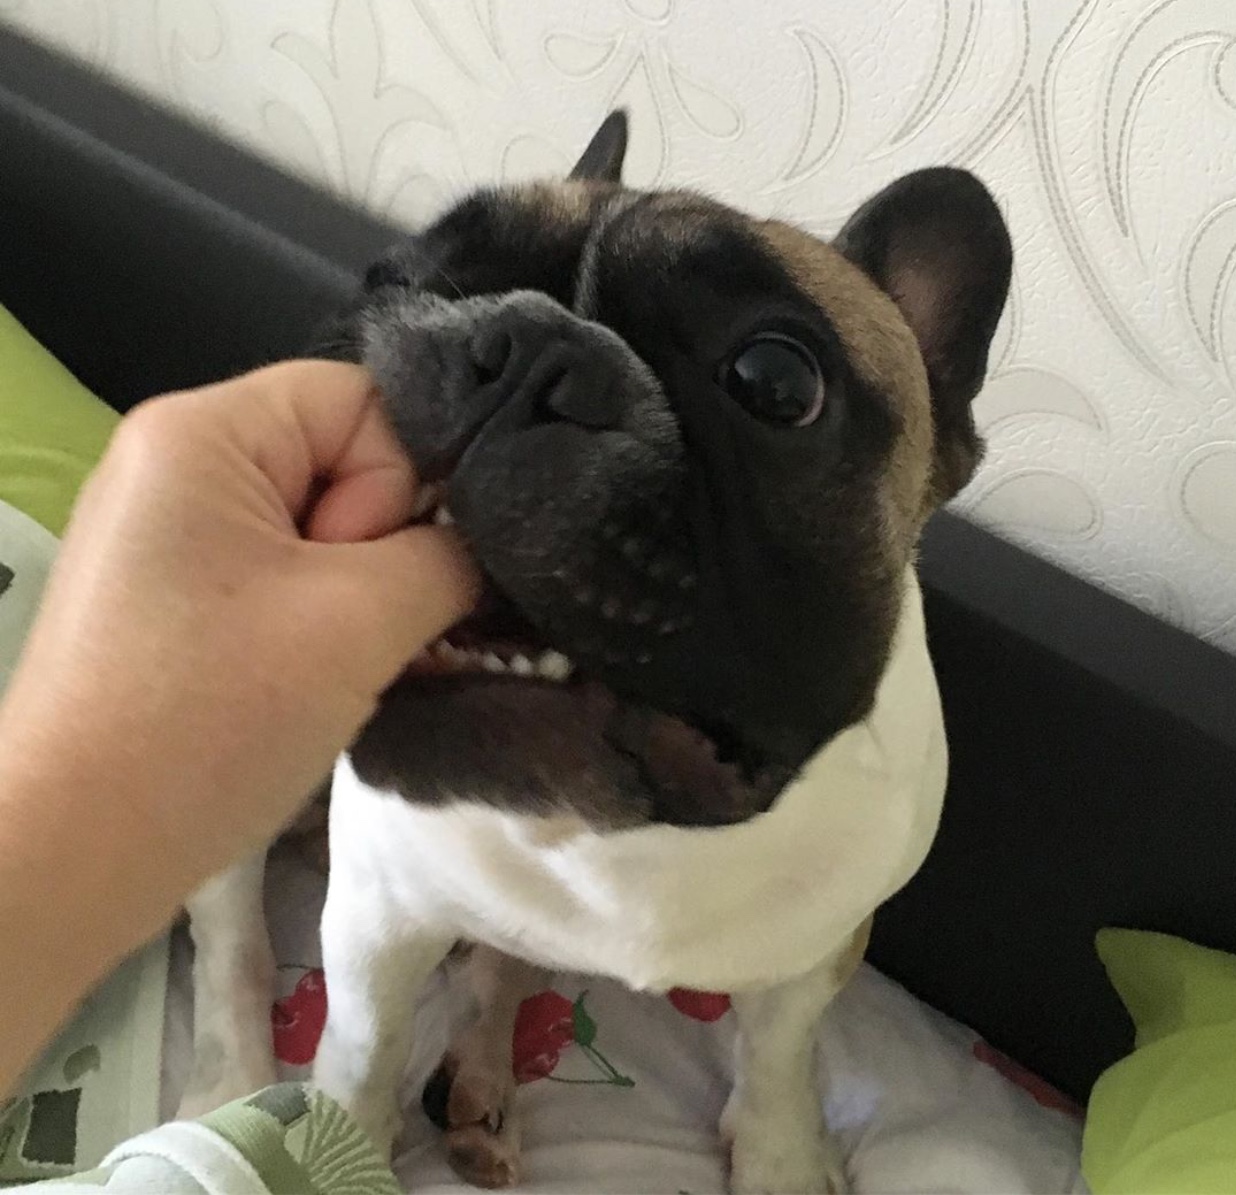 A French Bulldog biting the hand of a person